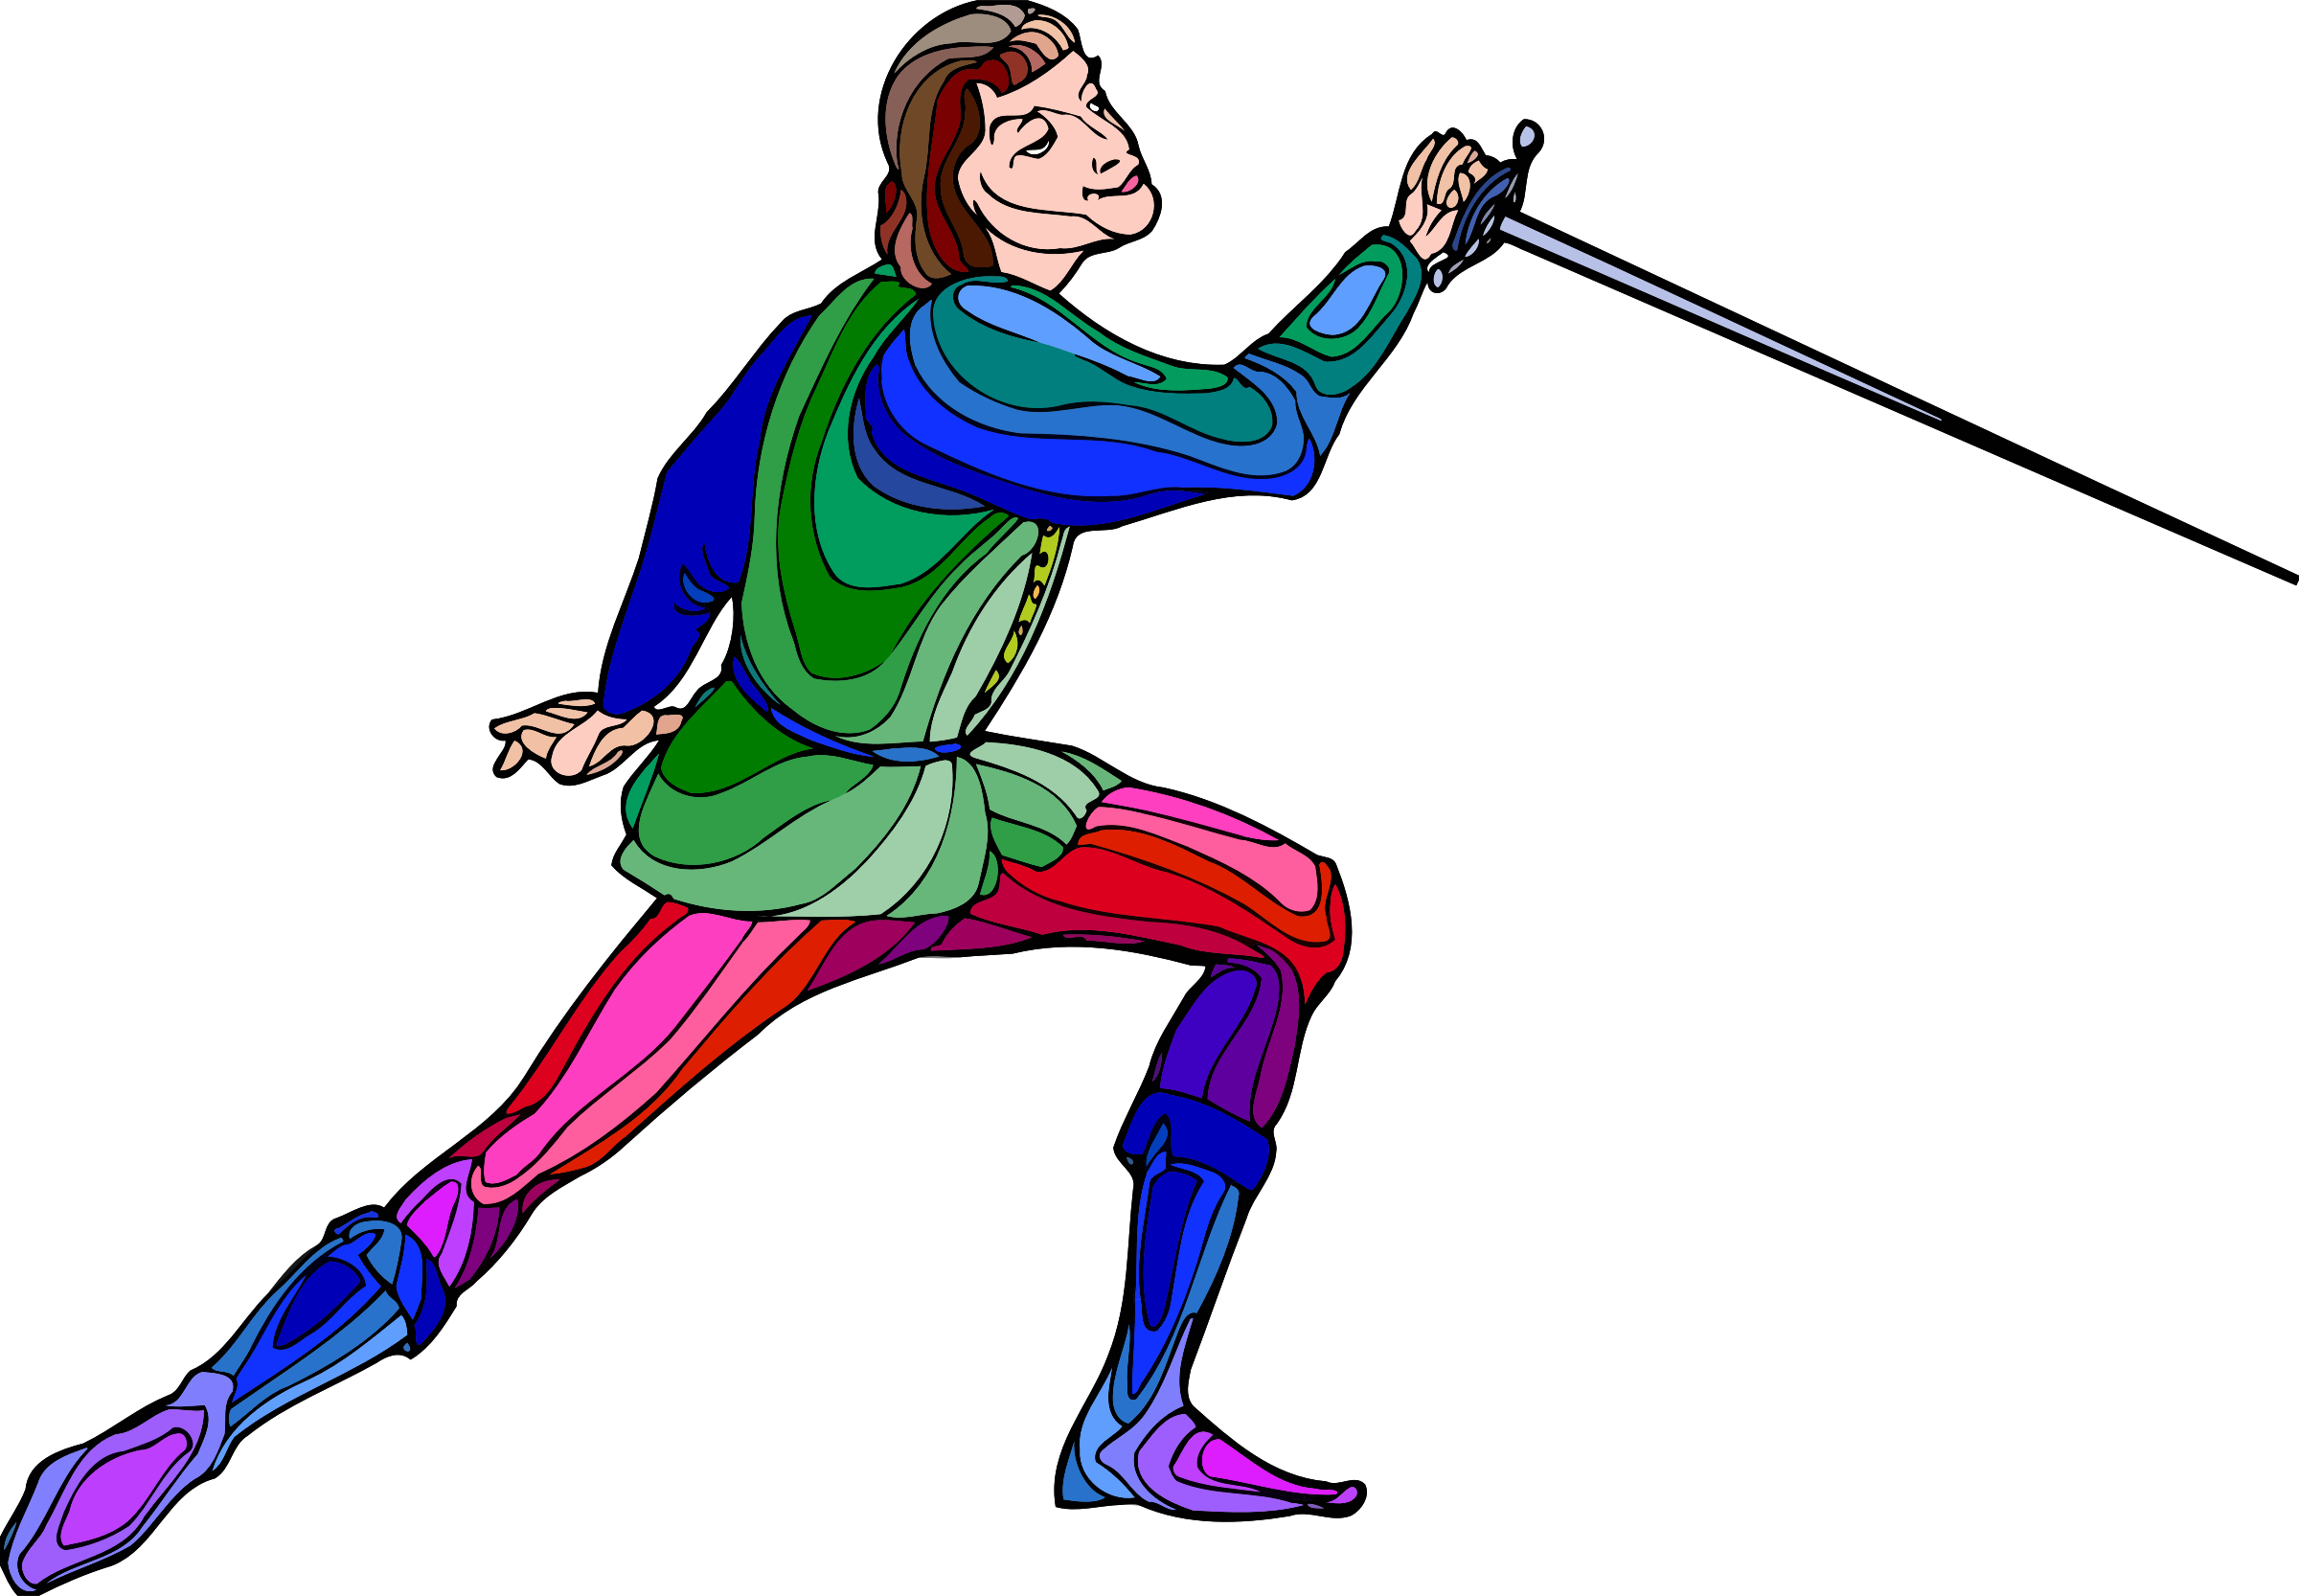 Shakespeare fencing character vector clipart image